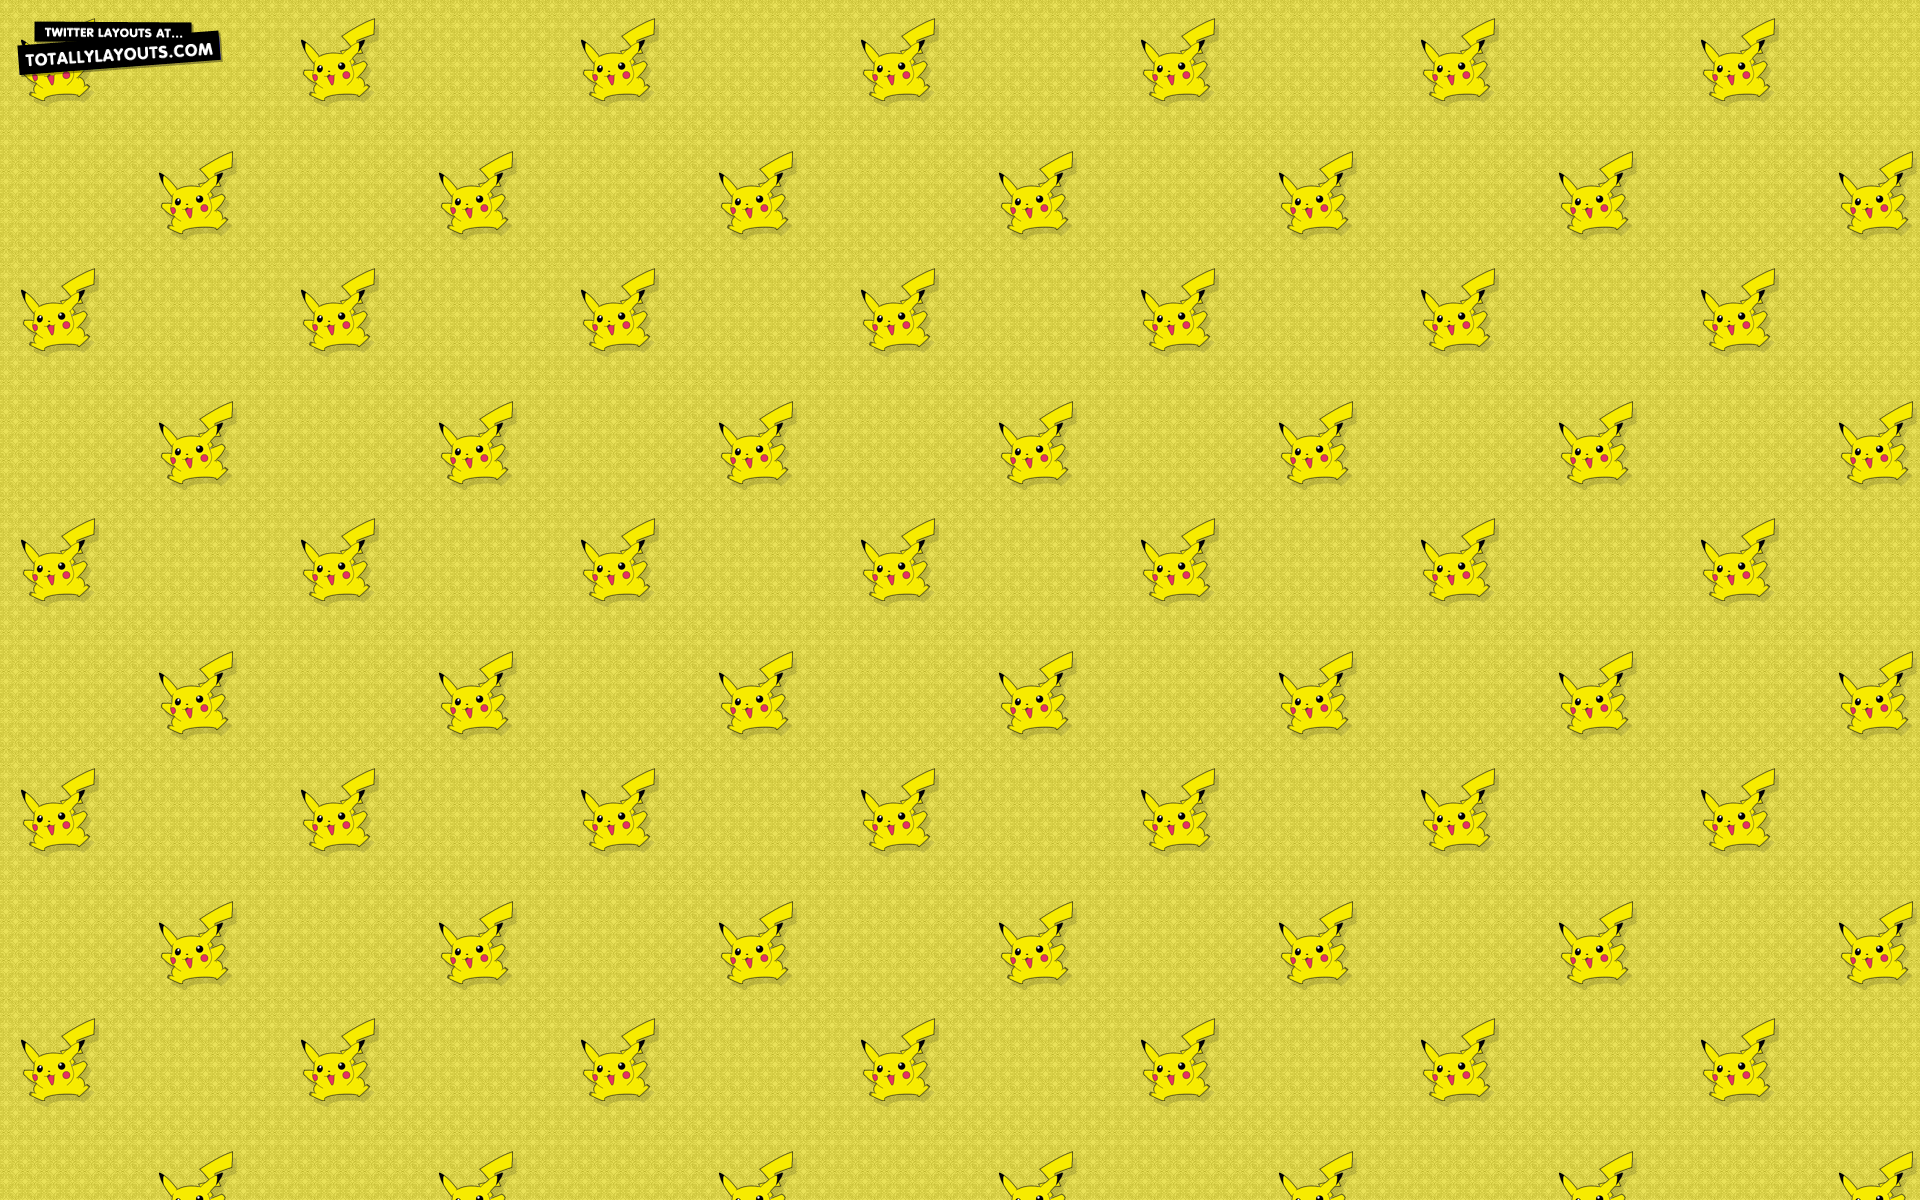 detective pikachu wallpaper by peagaoficial on DeviantArt